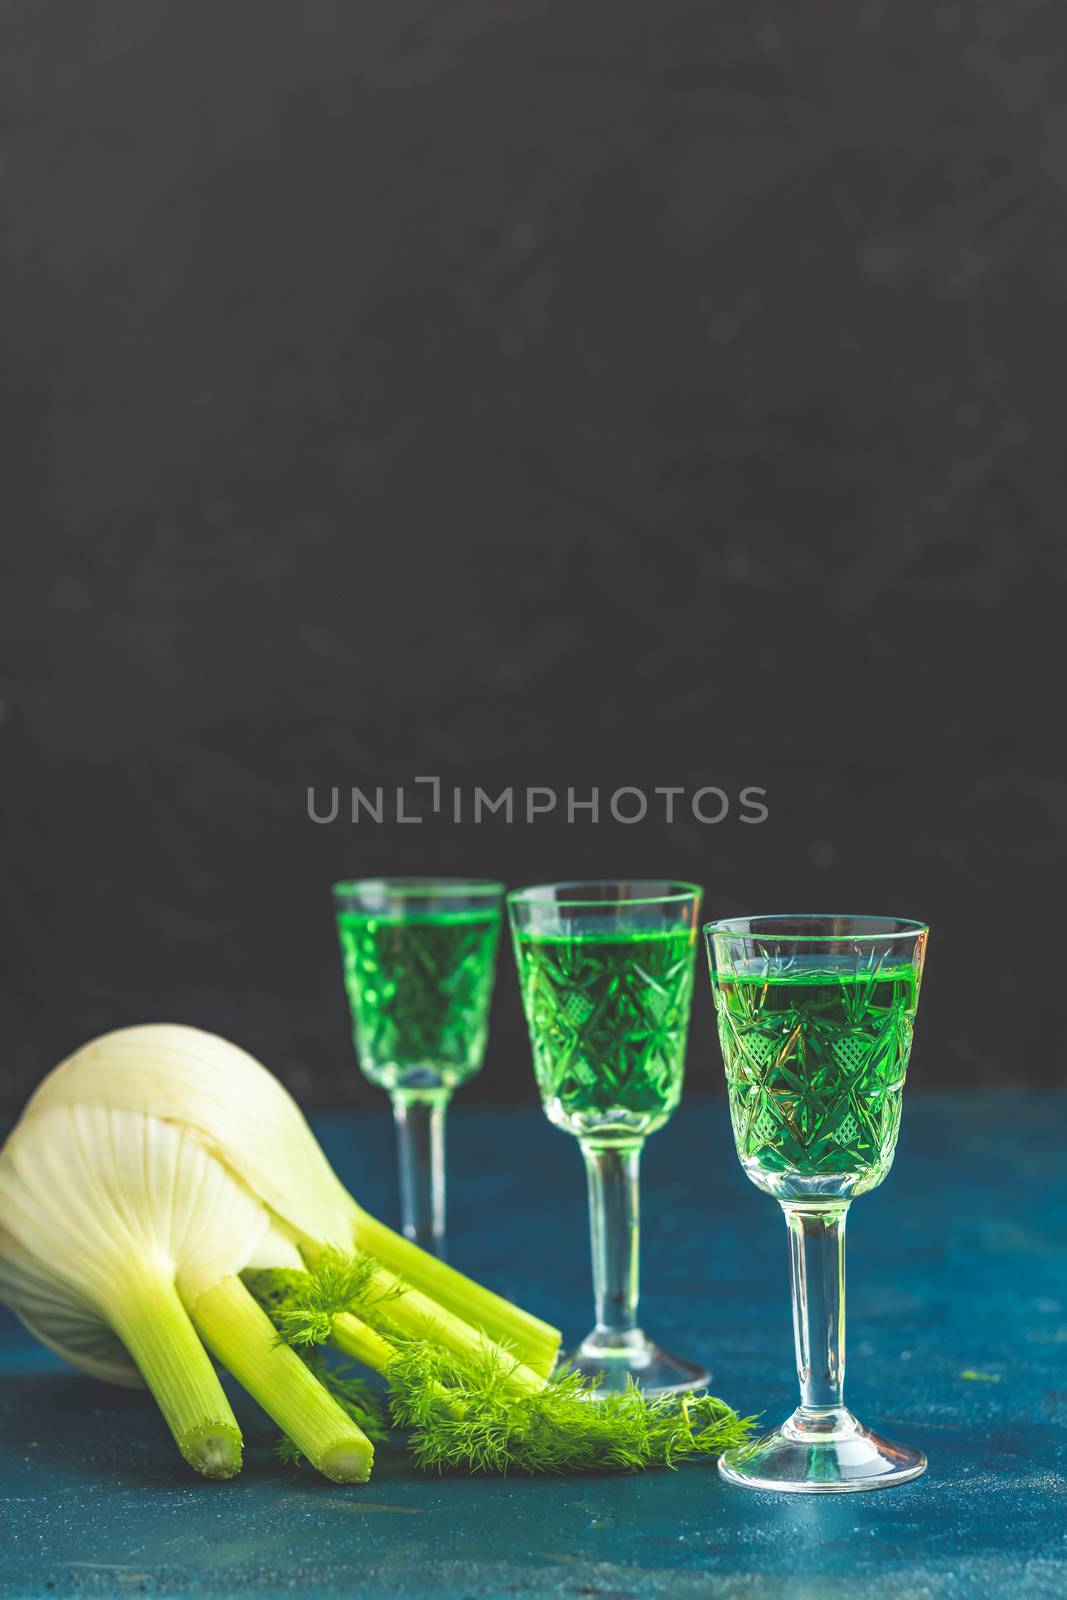 Traditional italian or czech liqueur or bitter with fennel by ArtSvitlyna